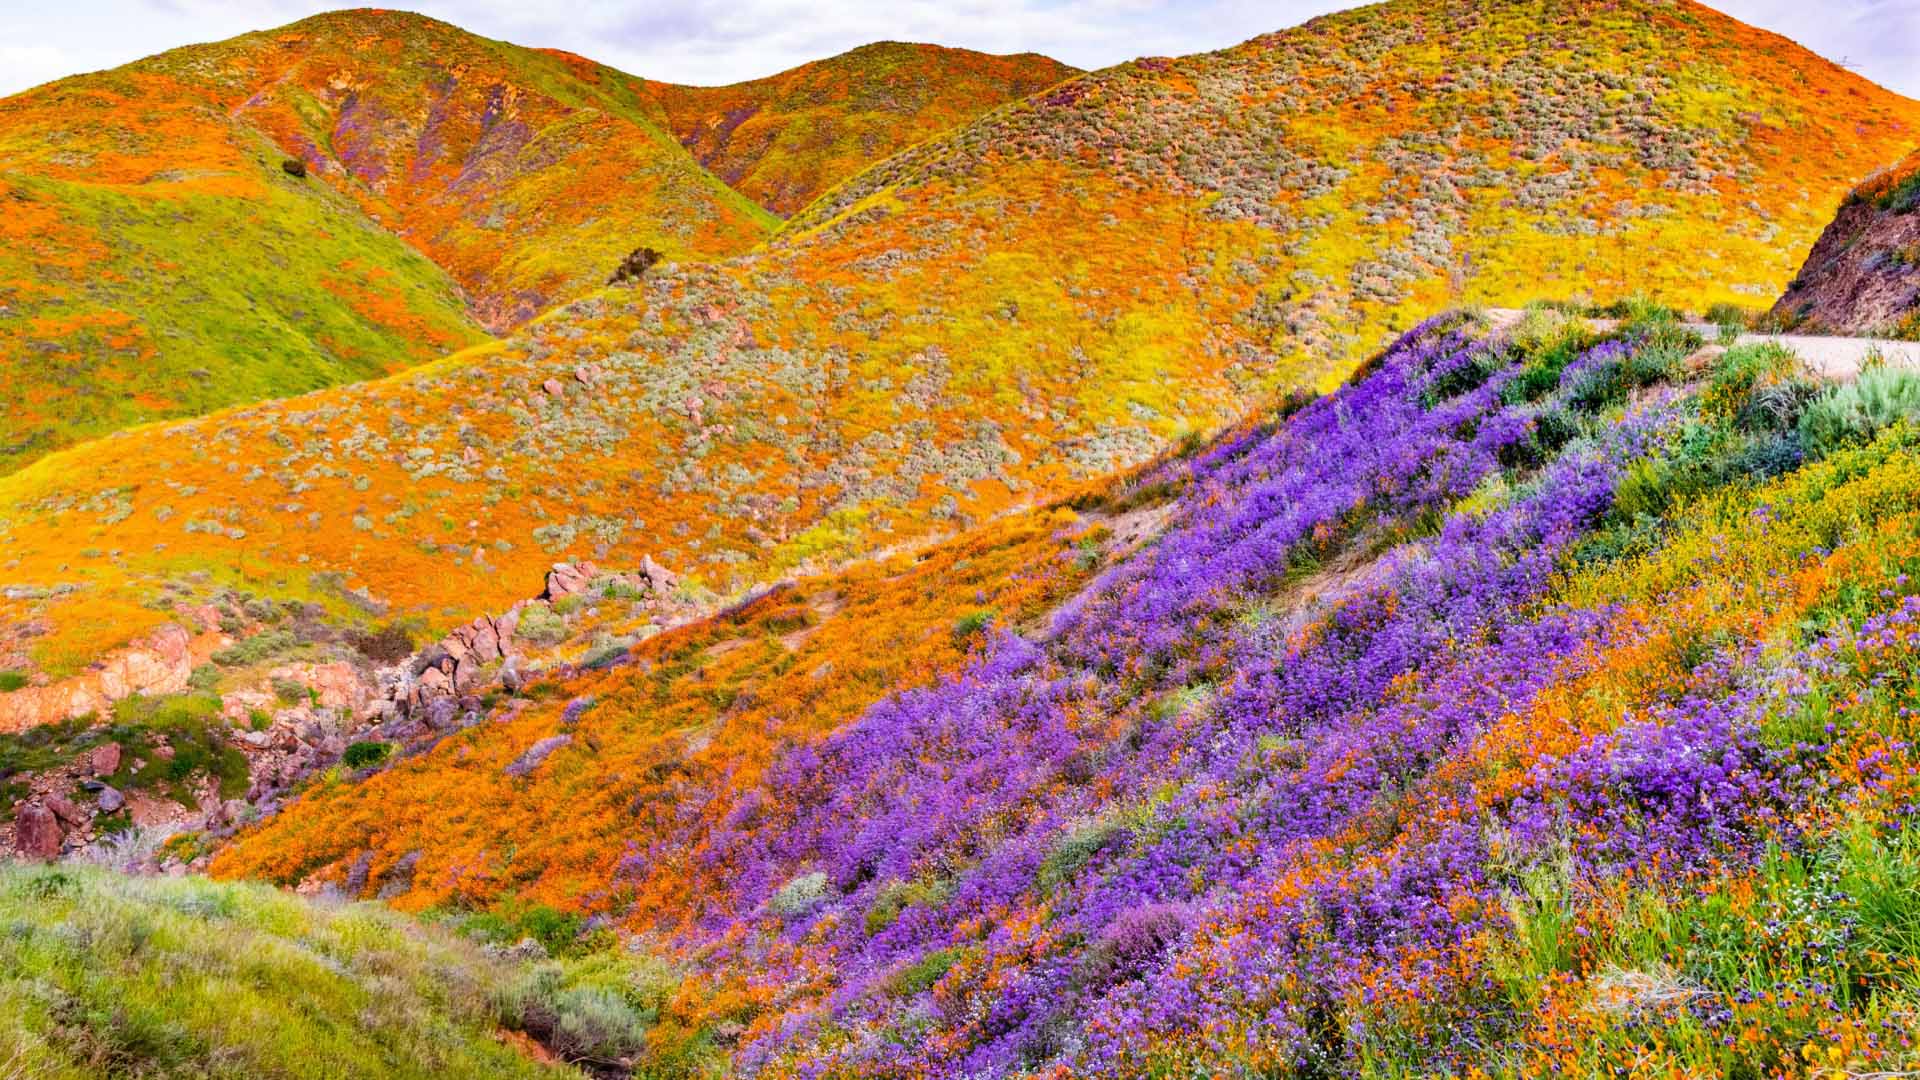 Walker Canyon poppies in Lake Elsinore during the 2019 superbloom